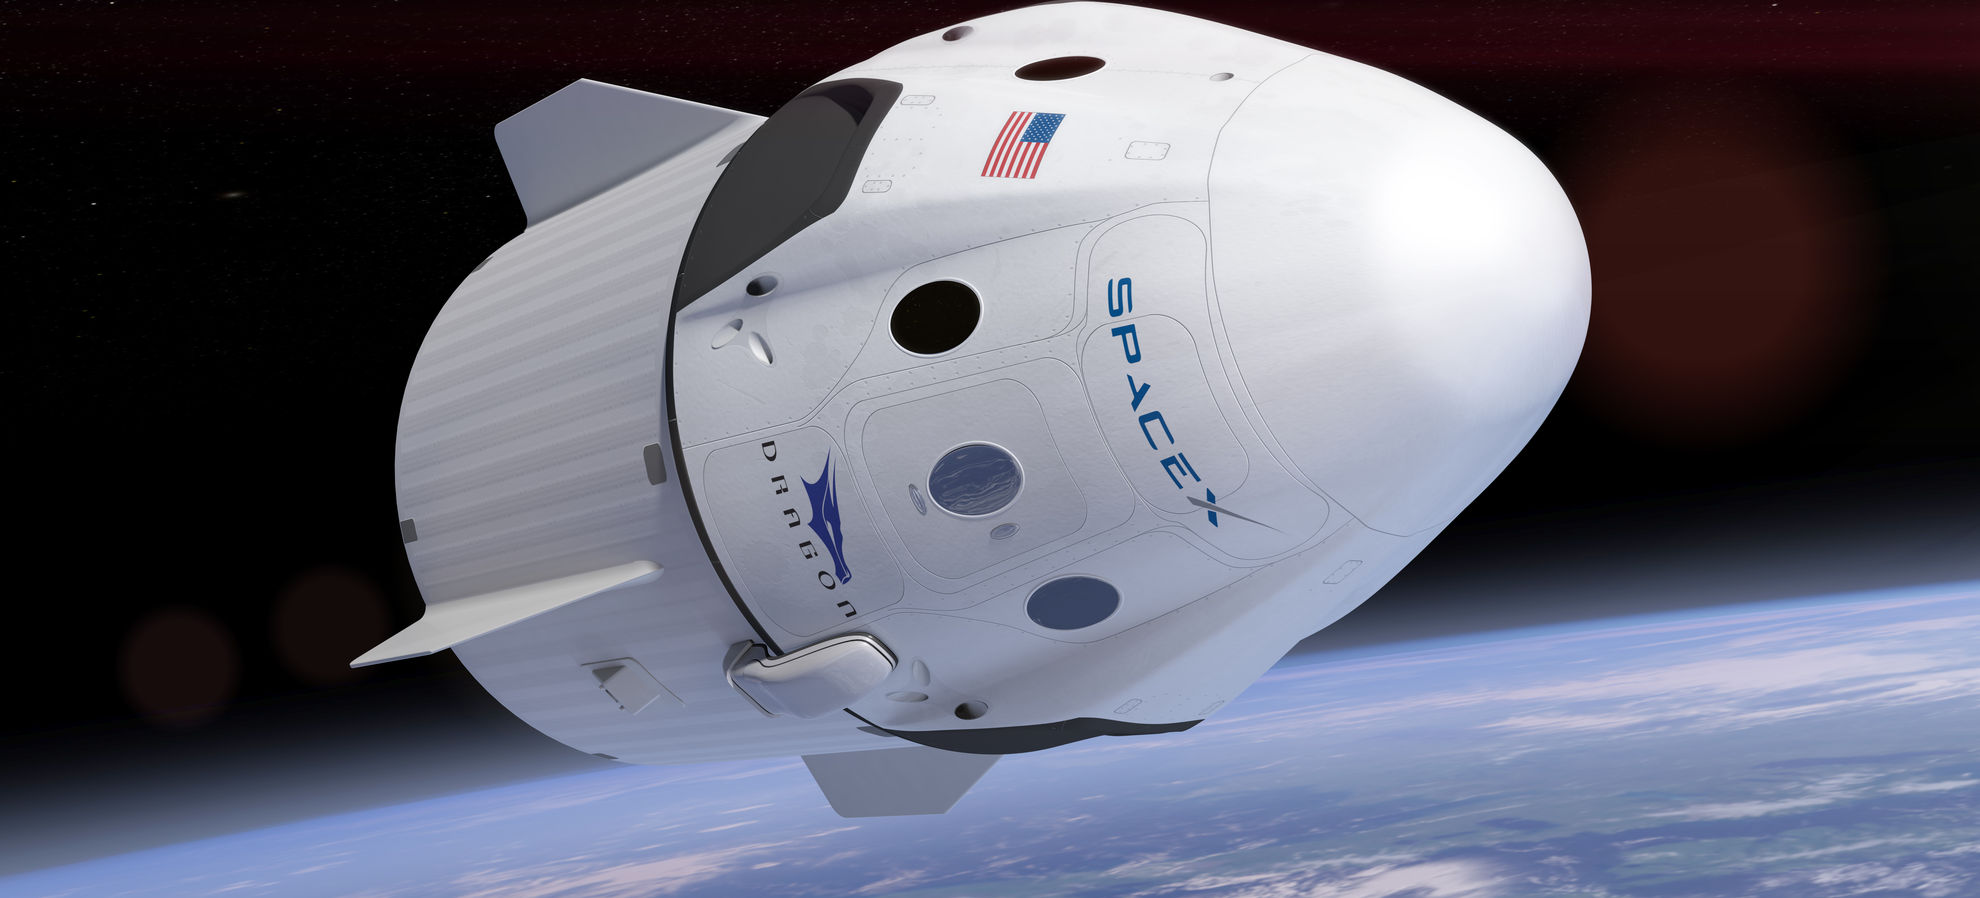 Elon Musk Announces Daring SpaceX Dragon Flight Beyond Moon with 2 Private Astronauts ...